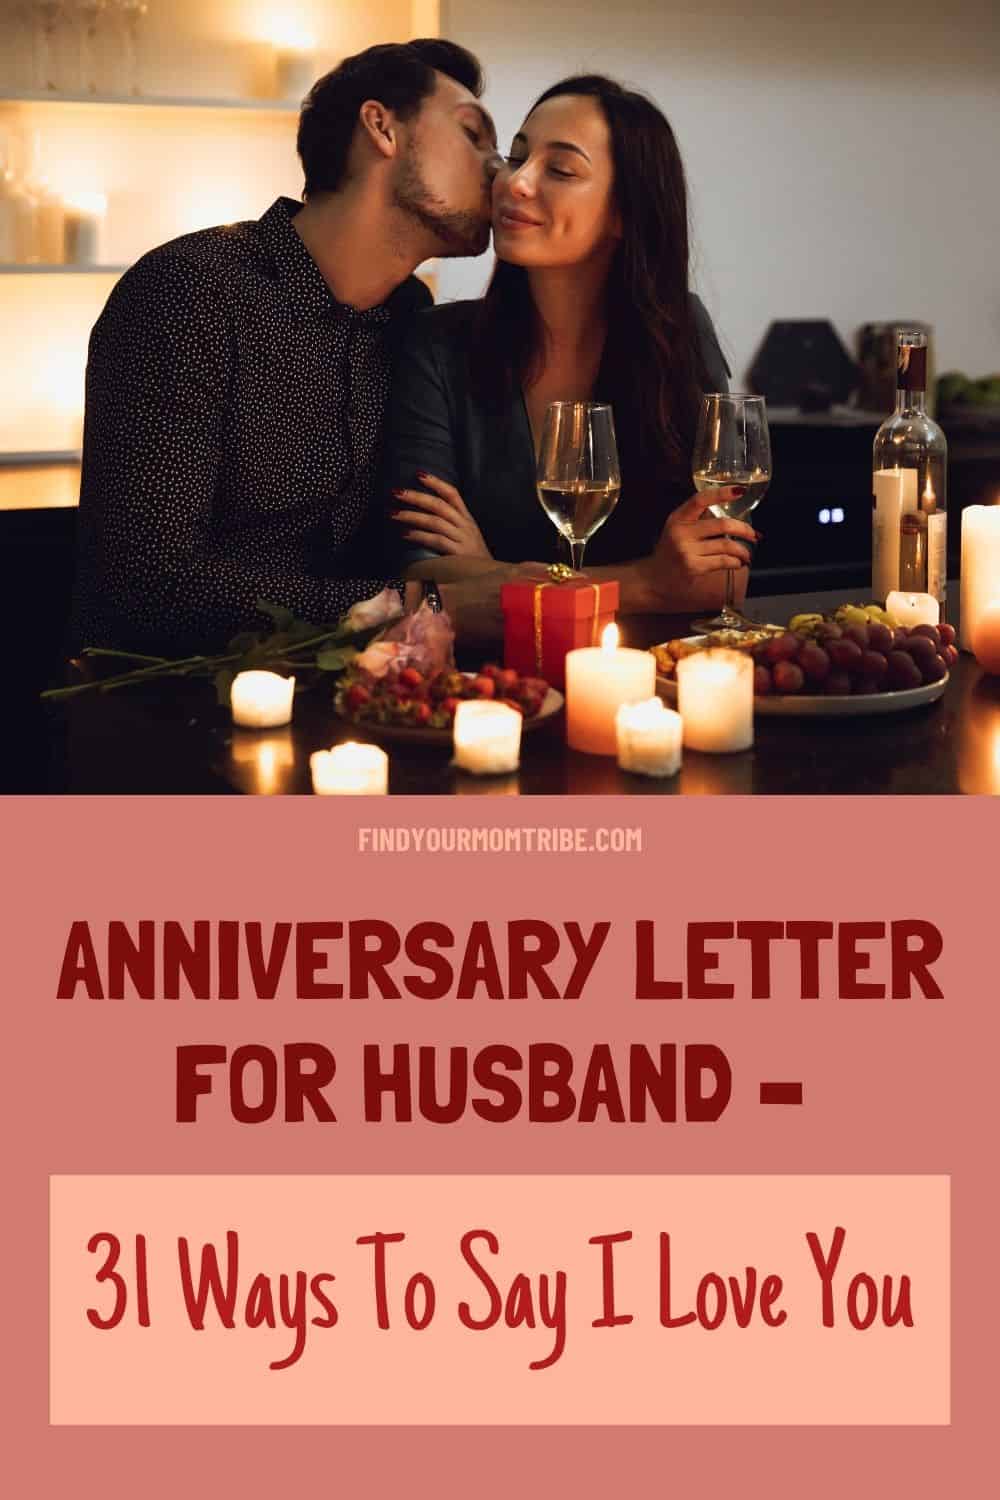 Anniversary Letter For Husband 31 Ways To Say I Love You